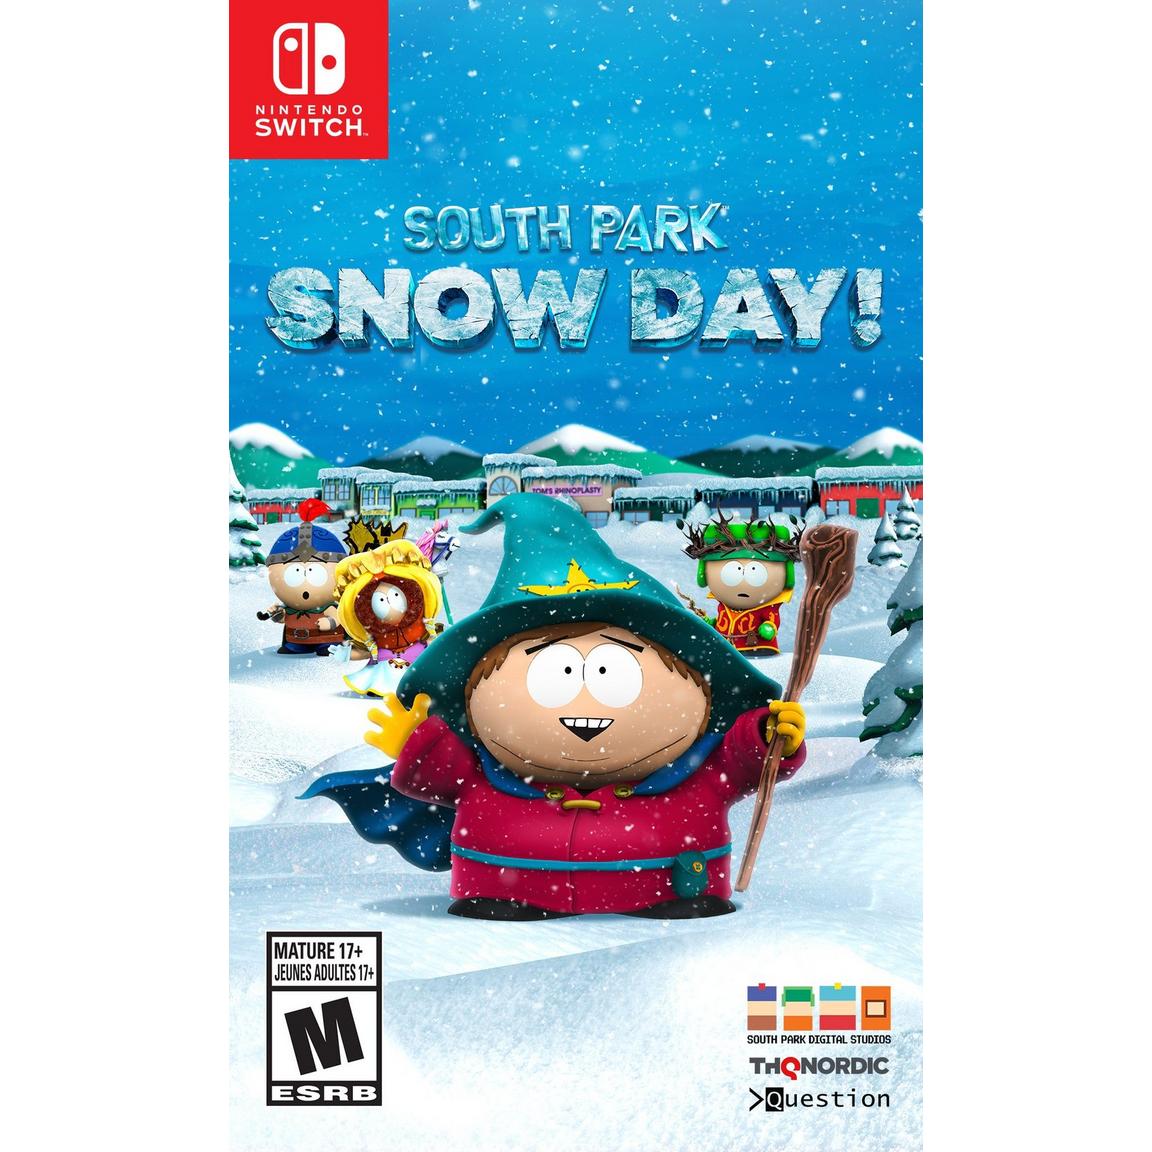 Видеоигра SOUTH PARK: SNOW DAY! - Nintendo Switch south park the fractured but whole дополнение от заката до каса бонита